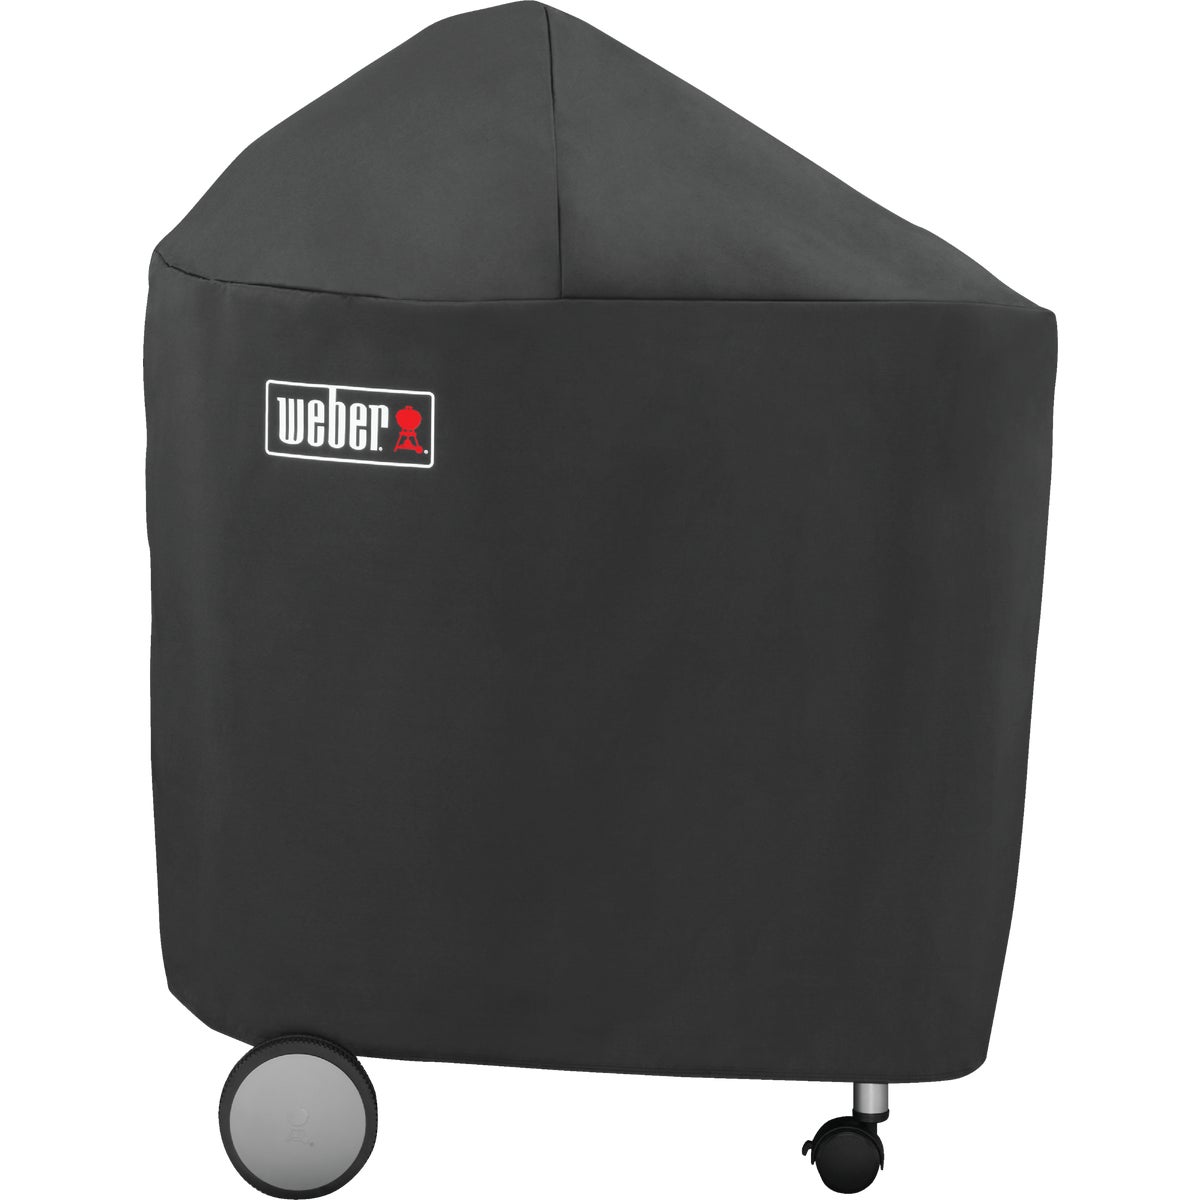 Item 802081, Premium grill cover compatible with Performer 22-inch charcoal grills with 